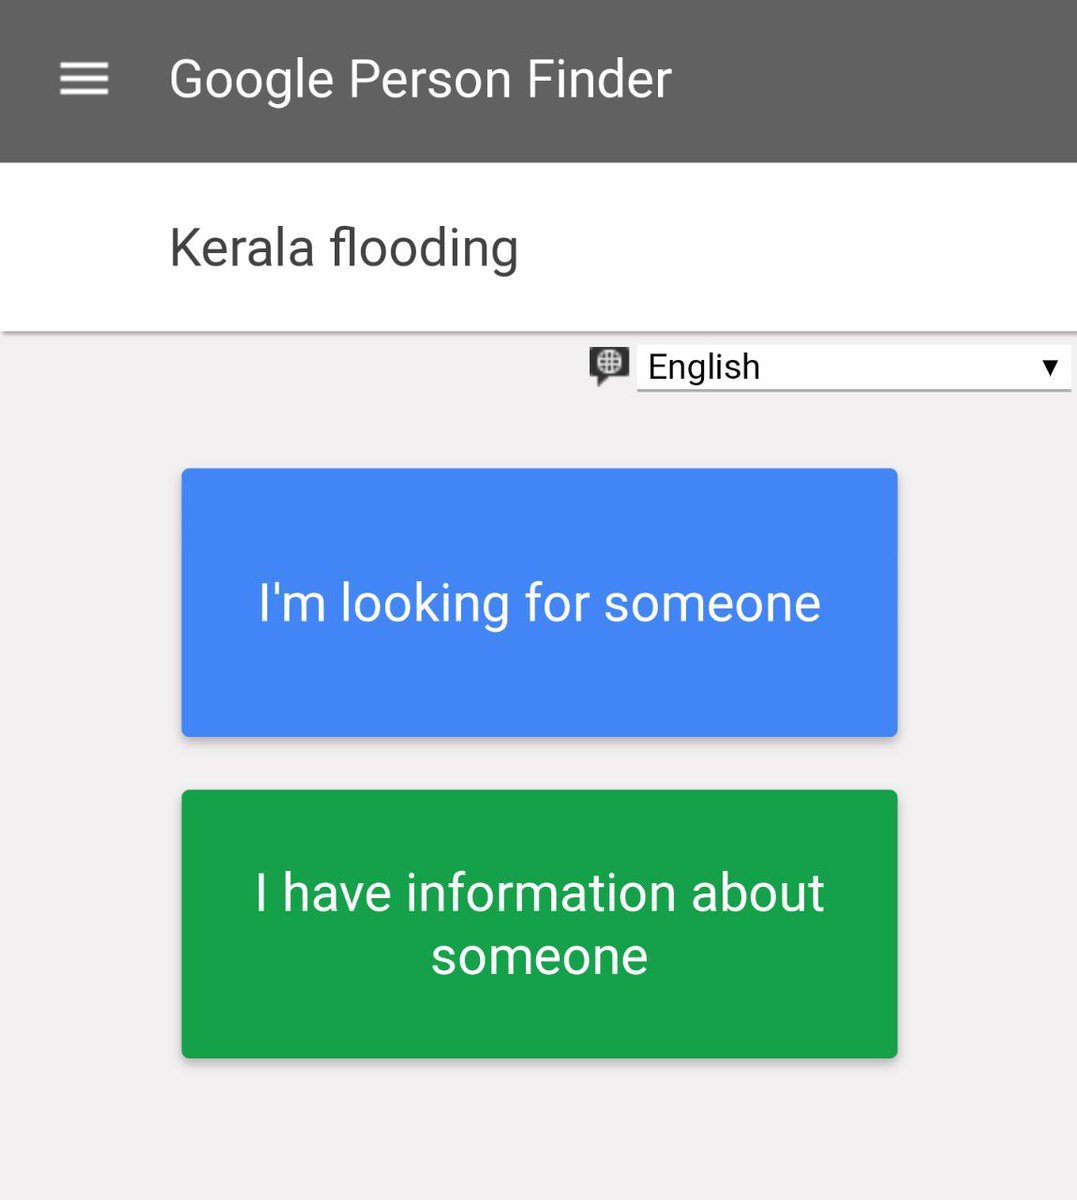 Our thoughts are with those in Kerala. Help track missing people with #personfinder: goo.gl/WxuUFp #KeralaFloods